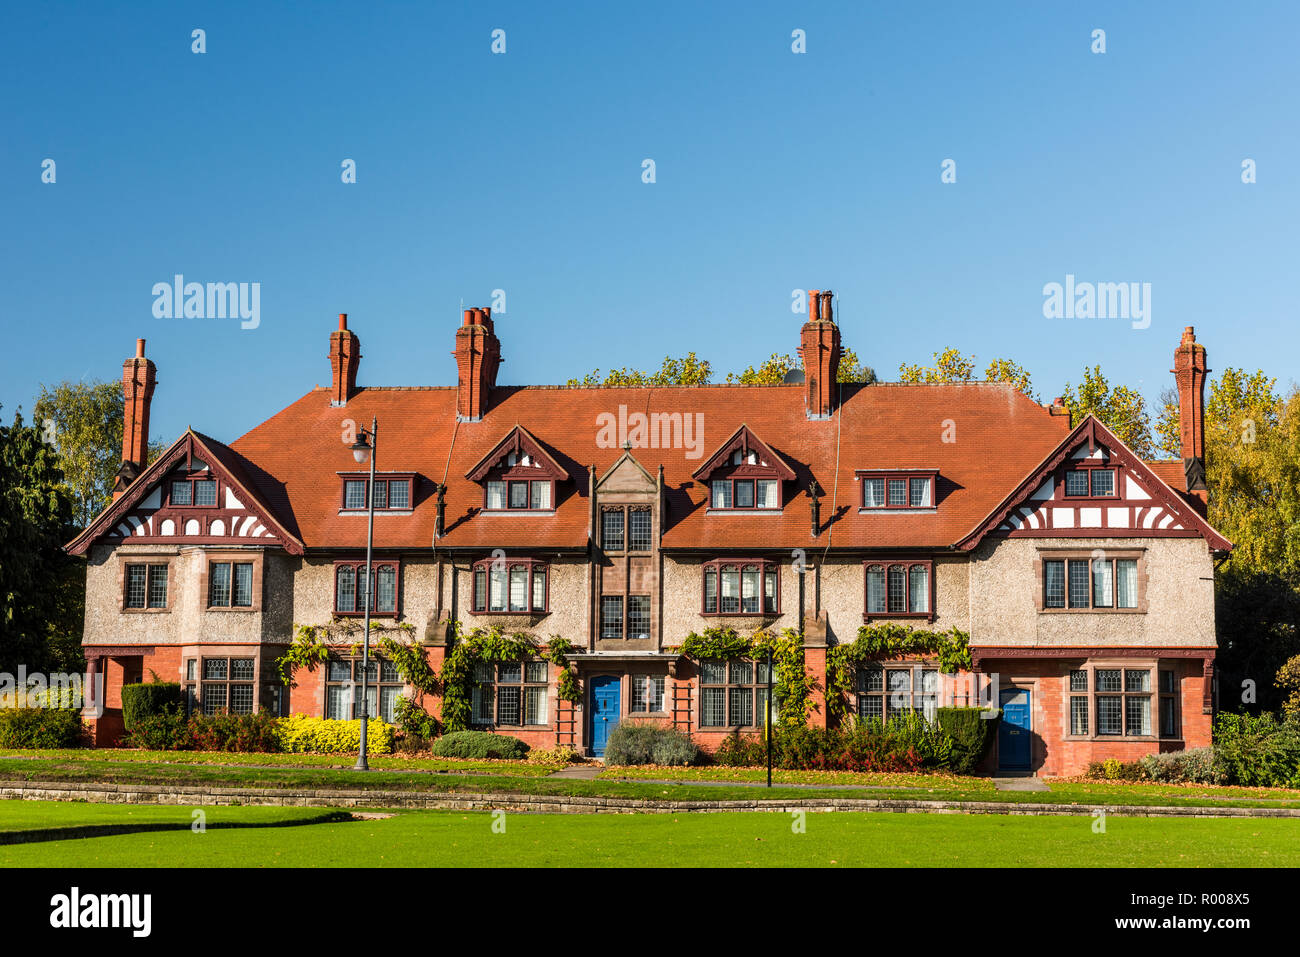 Historic house in Port Sunlight conservation village, Wirral, Merseyside, England Stock Photo